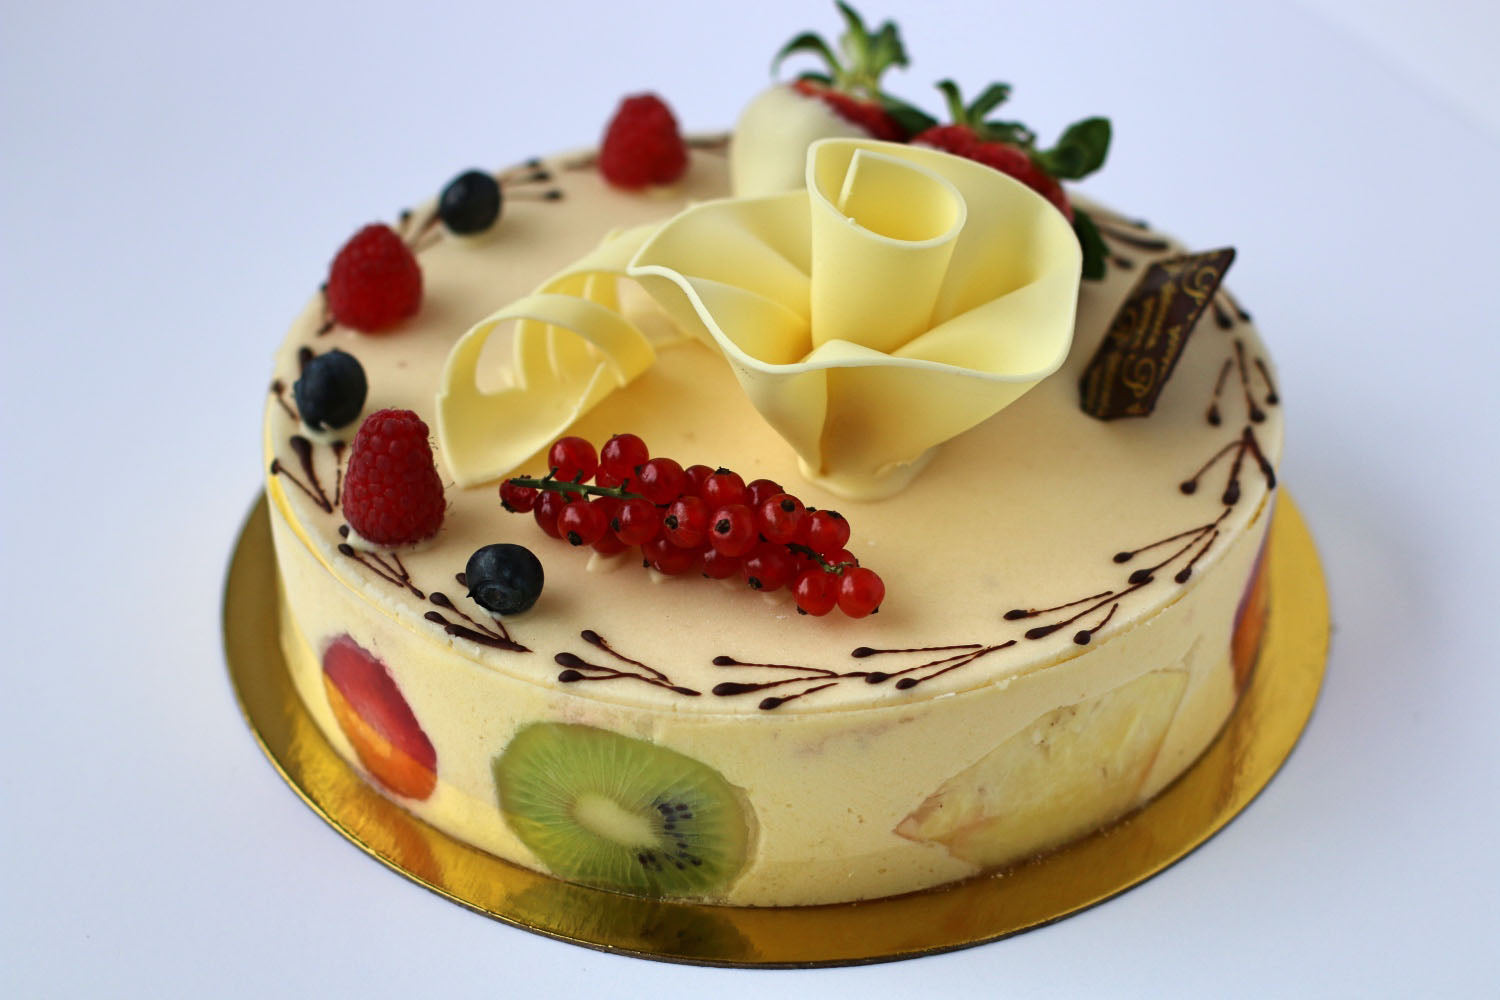 Send fresh fruit cakes to loved ones in Gurgaon | Gurgaon Bakers